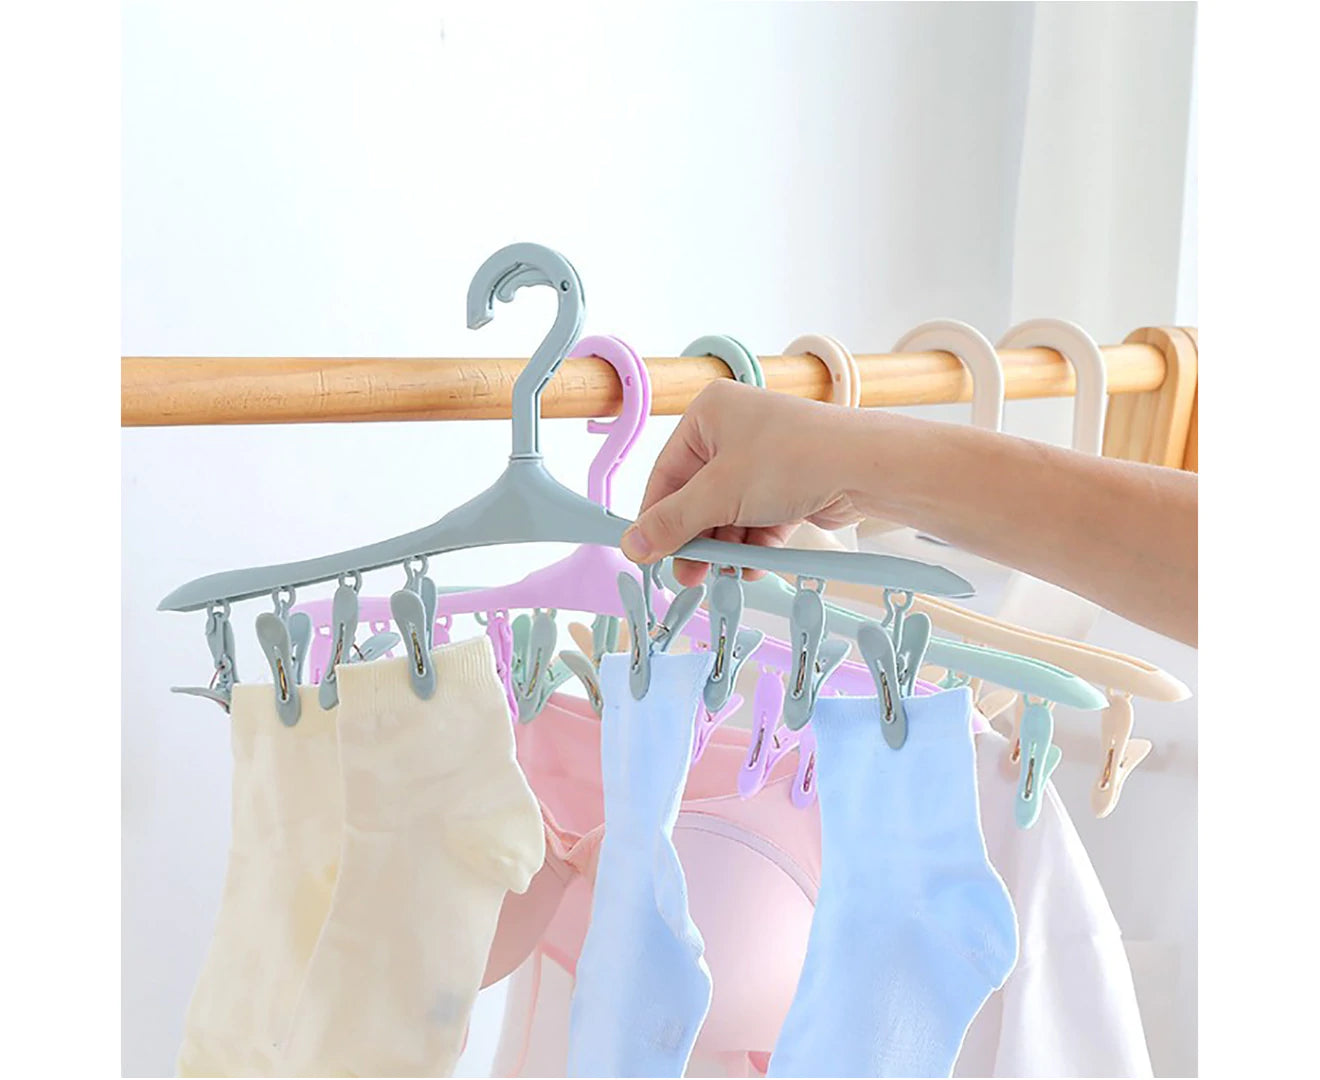 8 Clips Multifunctional Antiskid Space Saving Clothes Hanger